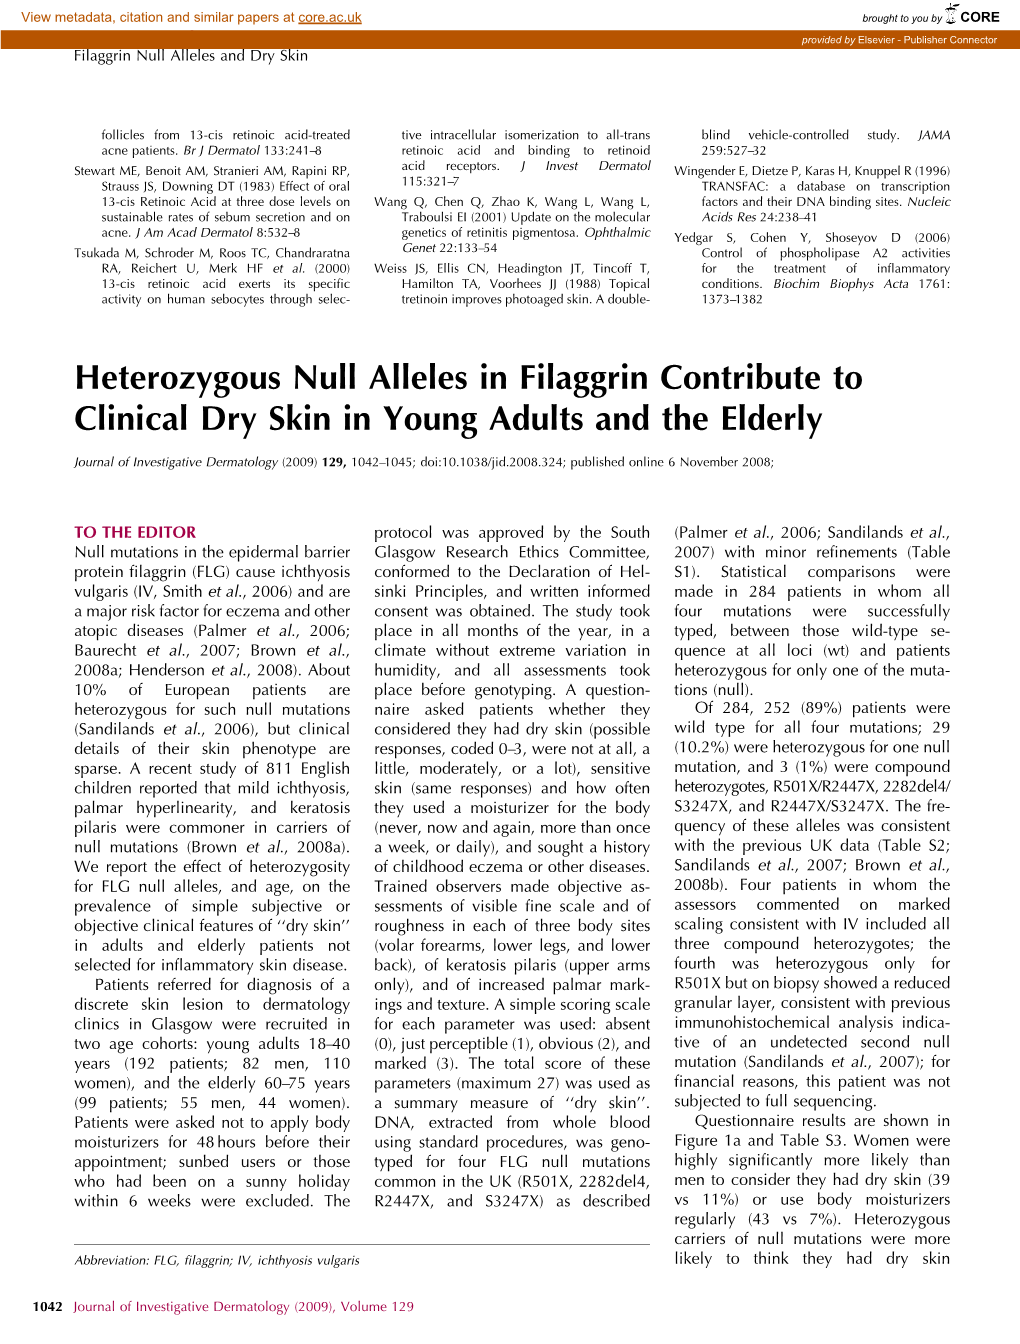 Heterozygous Null Alleles in Filaggrin Contribute to Clinical Dry Skin in Young Adults and the Elderly